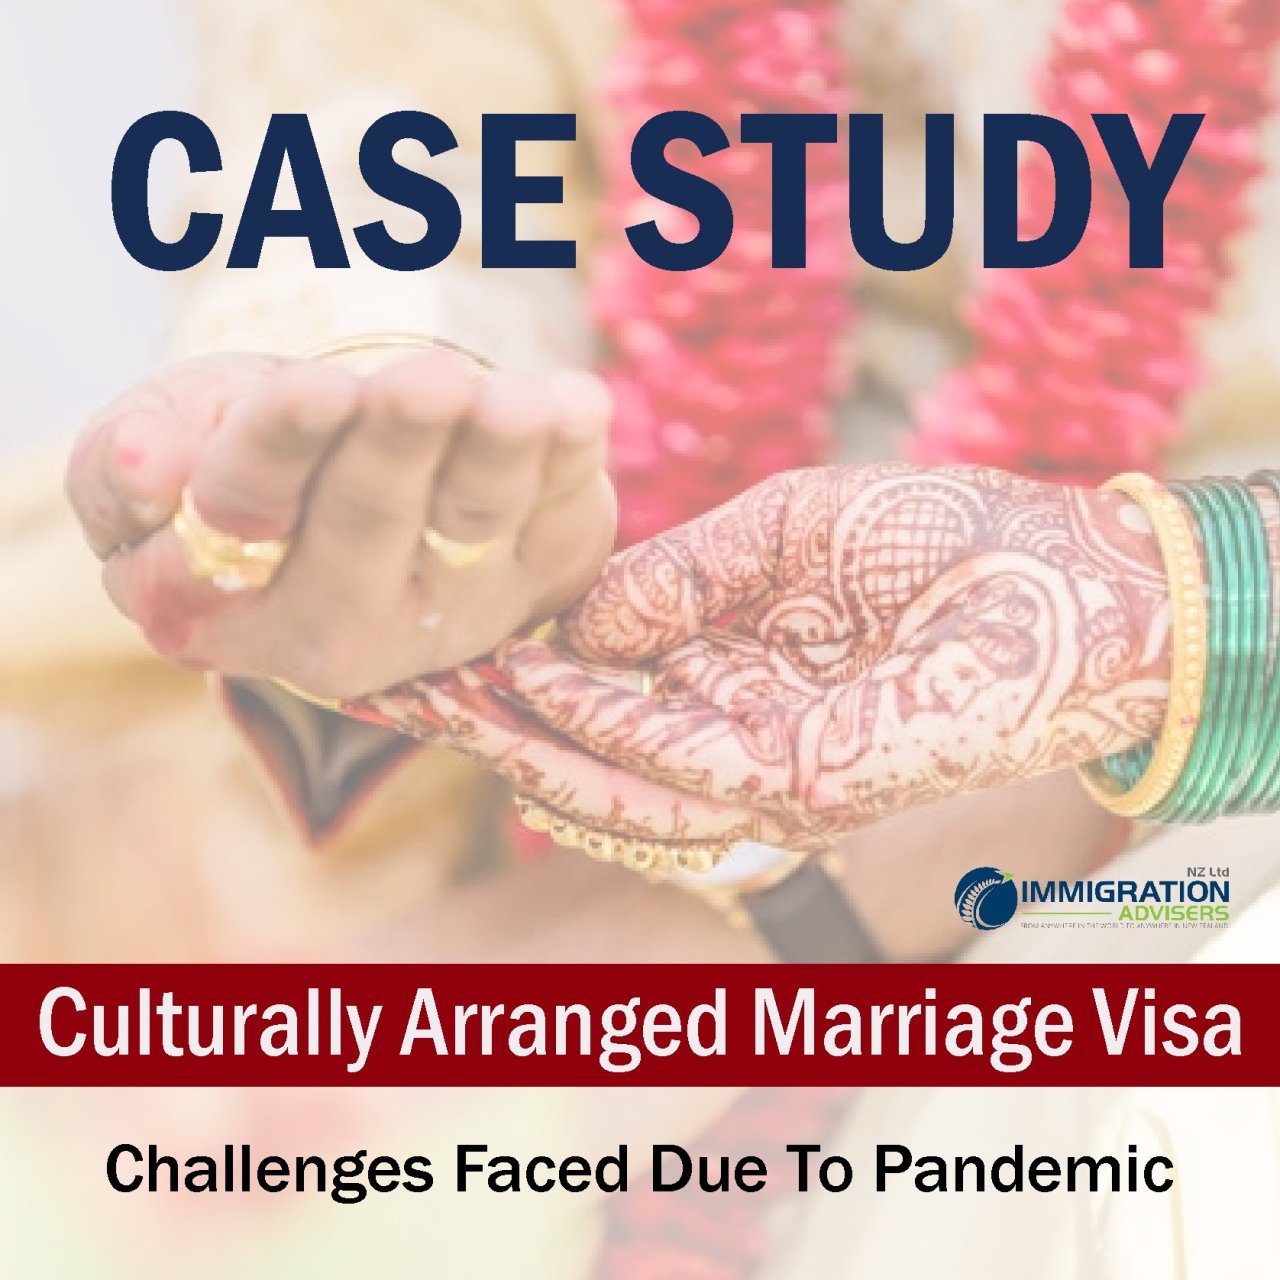 Case Study: Culturally Arranged Marriage Visa  You can apply for this Culturally arranged marriage visitor visa, if you want to visit NZ to marry a citizen in an arranged marriage, or if you had an overseas arranged marriage with them. #Culturally arranged marriage visitor visa #ImmigrationAdvisers#IANZ #. #CaseStudy#ImmigrationUpdate#ImmigrationPolicy#Immigration#NewZealand#ImmigrationnewZealand#ImmigrationConsultants#NZVisa#PartnershipVisa#Marriage#Spouse